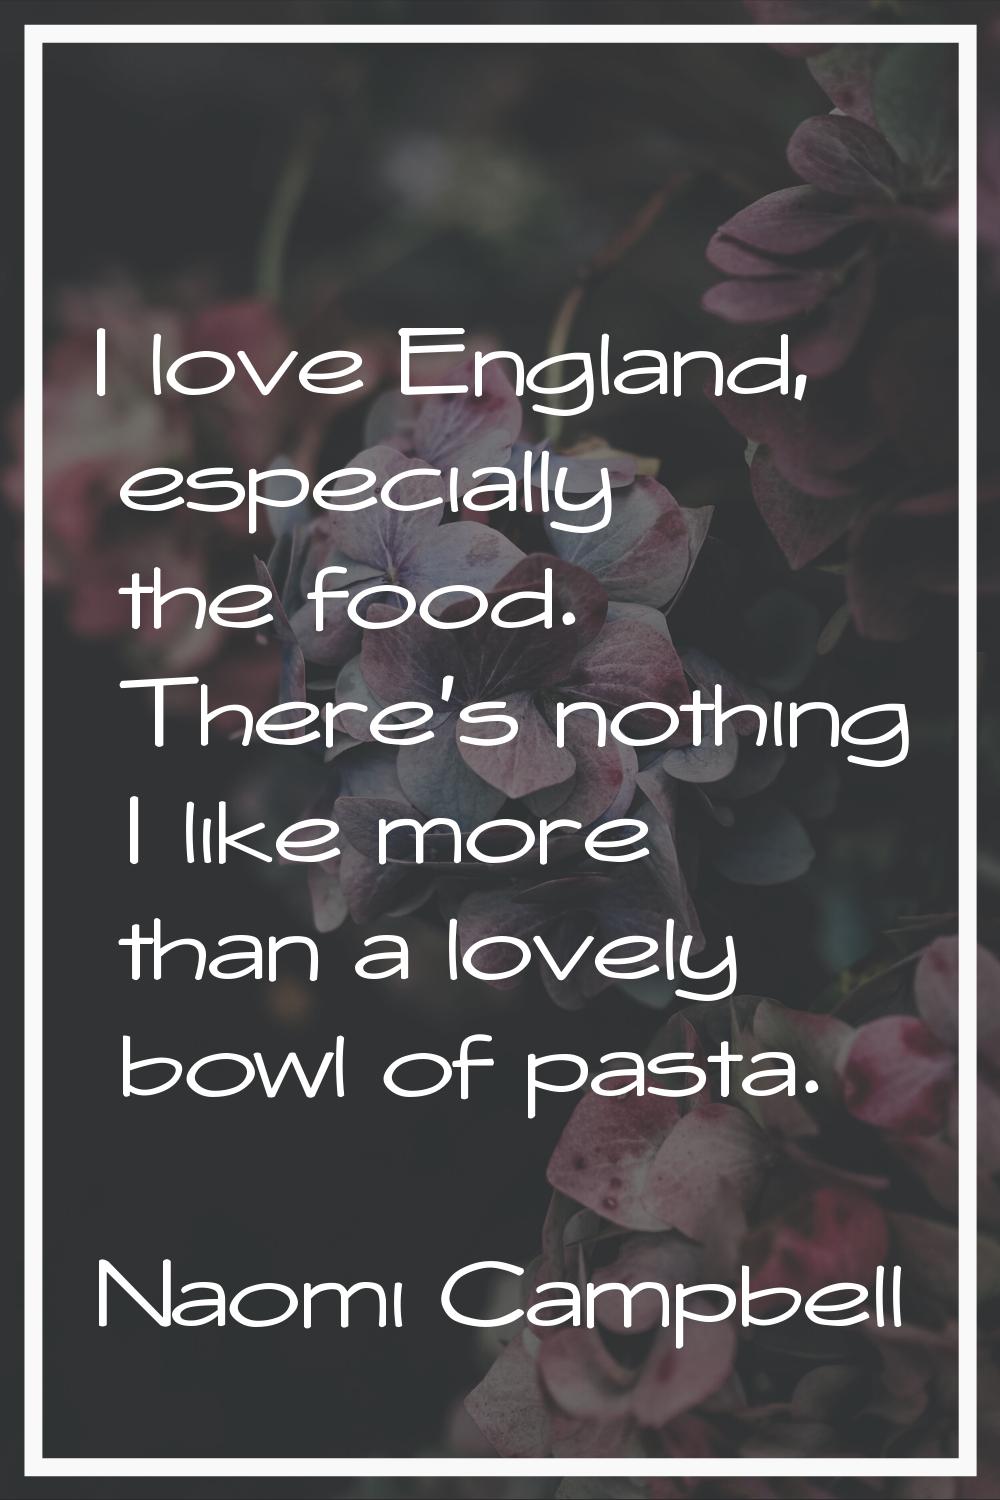 I love England, especially the food. There's nothing I like more than a lovely bowl of pasta.